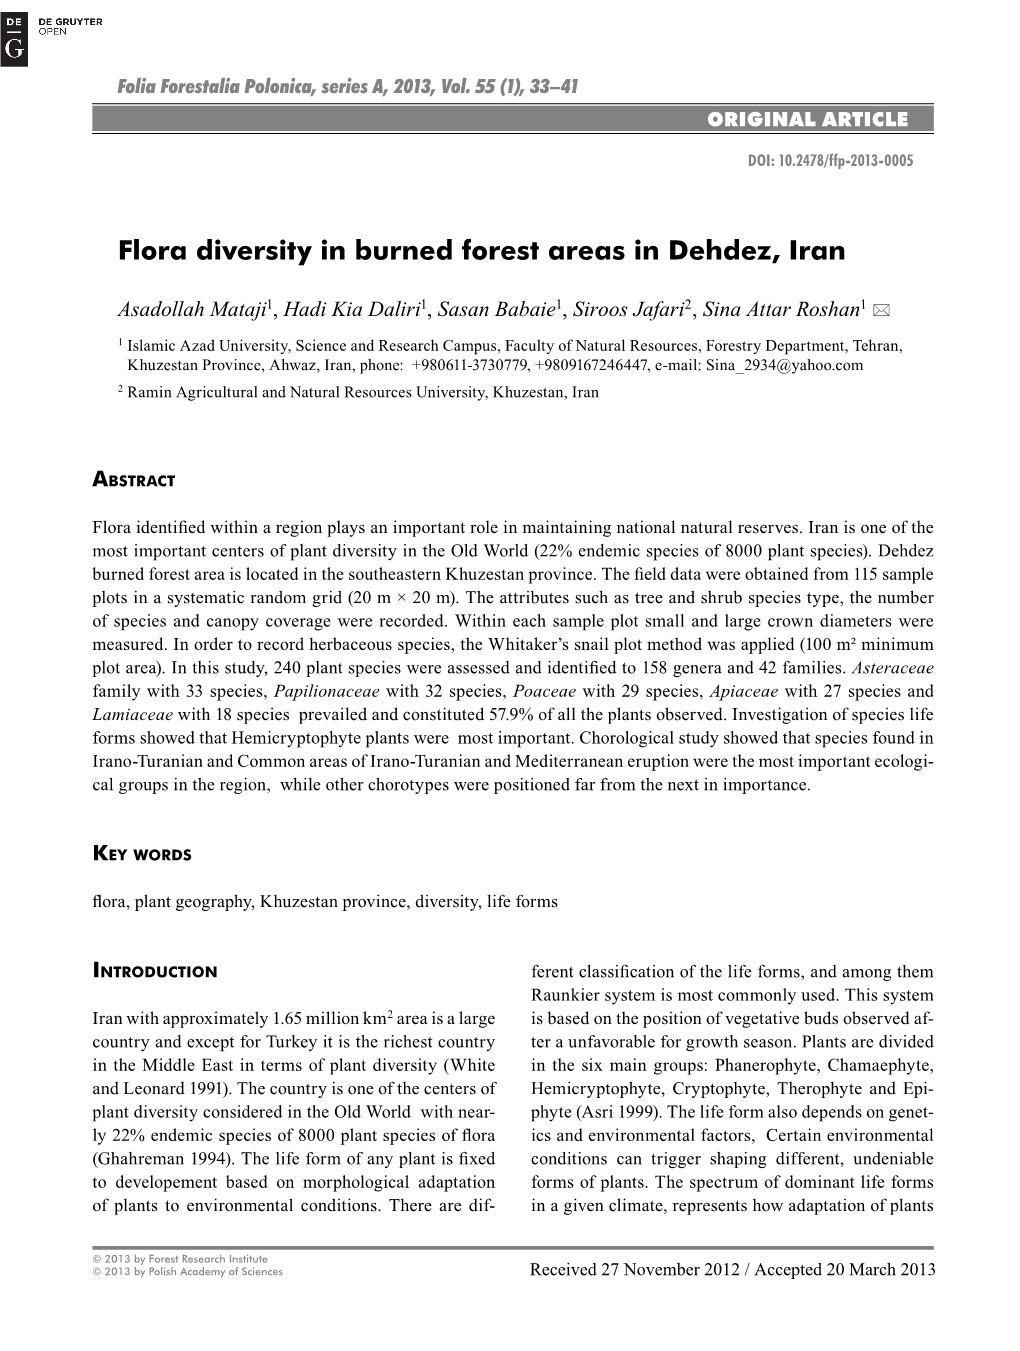 Flora Diversity in Burned Forest Areas in Dehdez, Iran